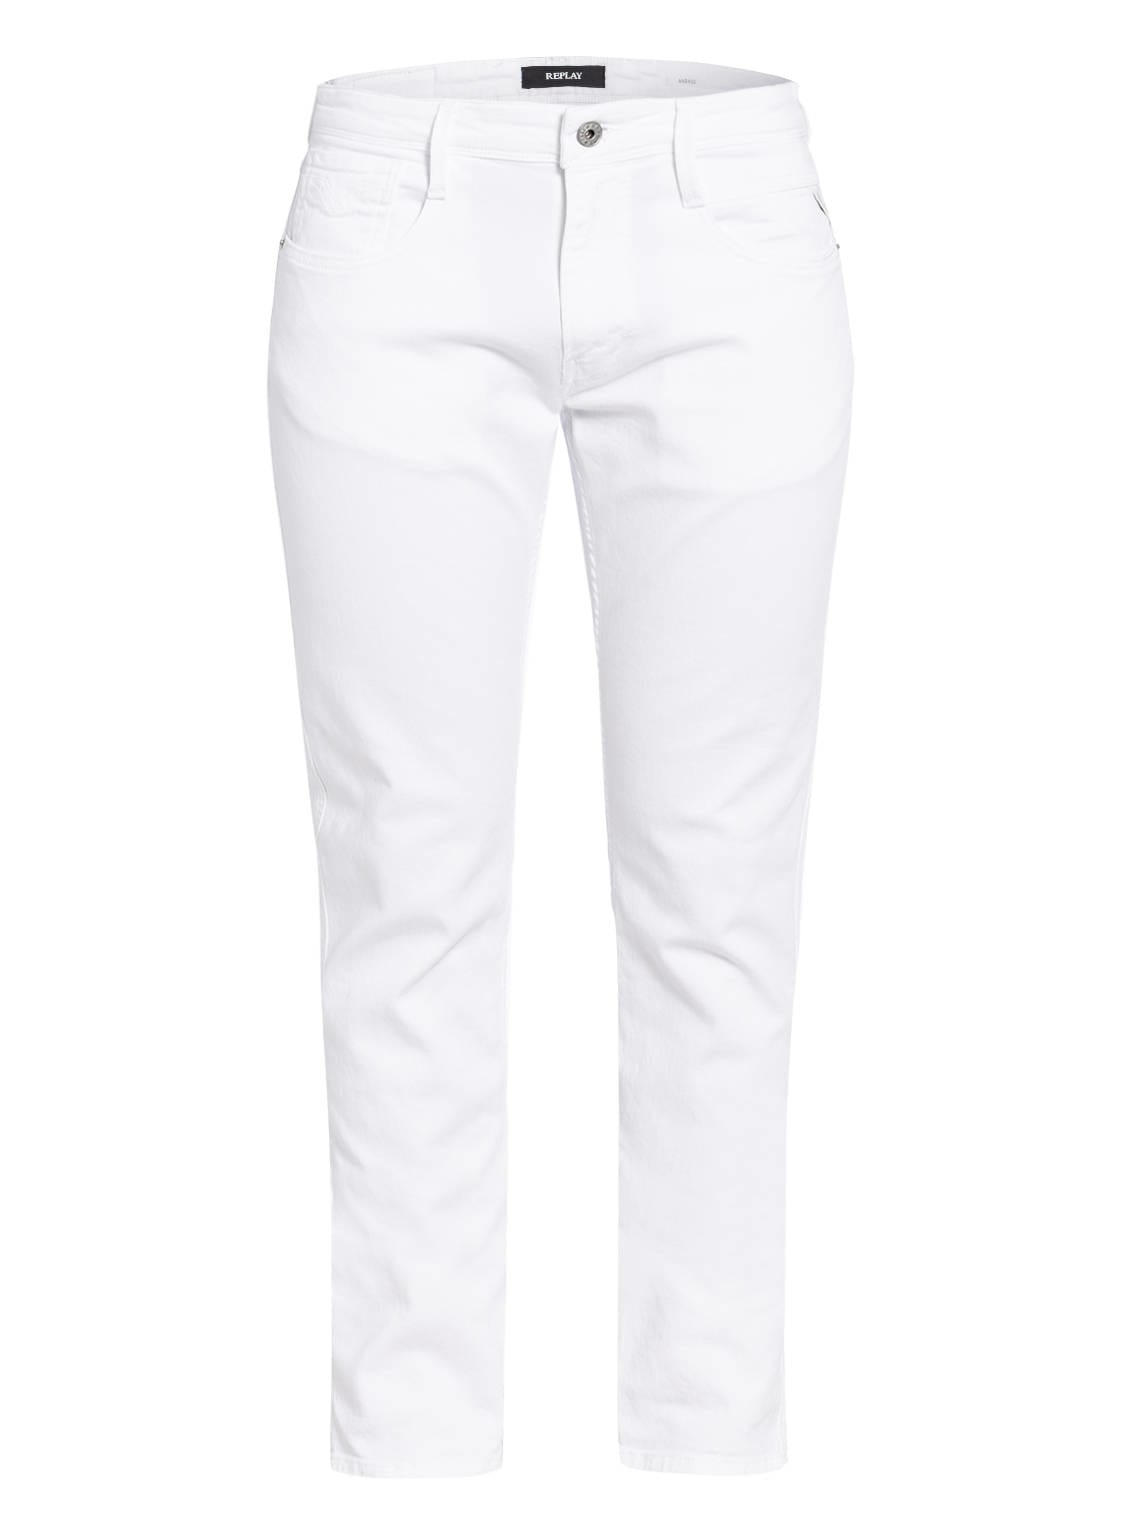 Replay Jeans Anbass Extra Slim Fit weiss von Replay